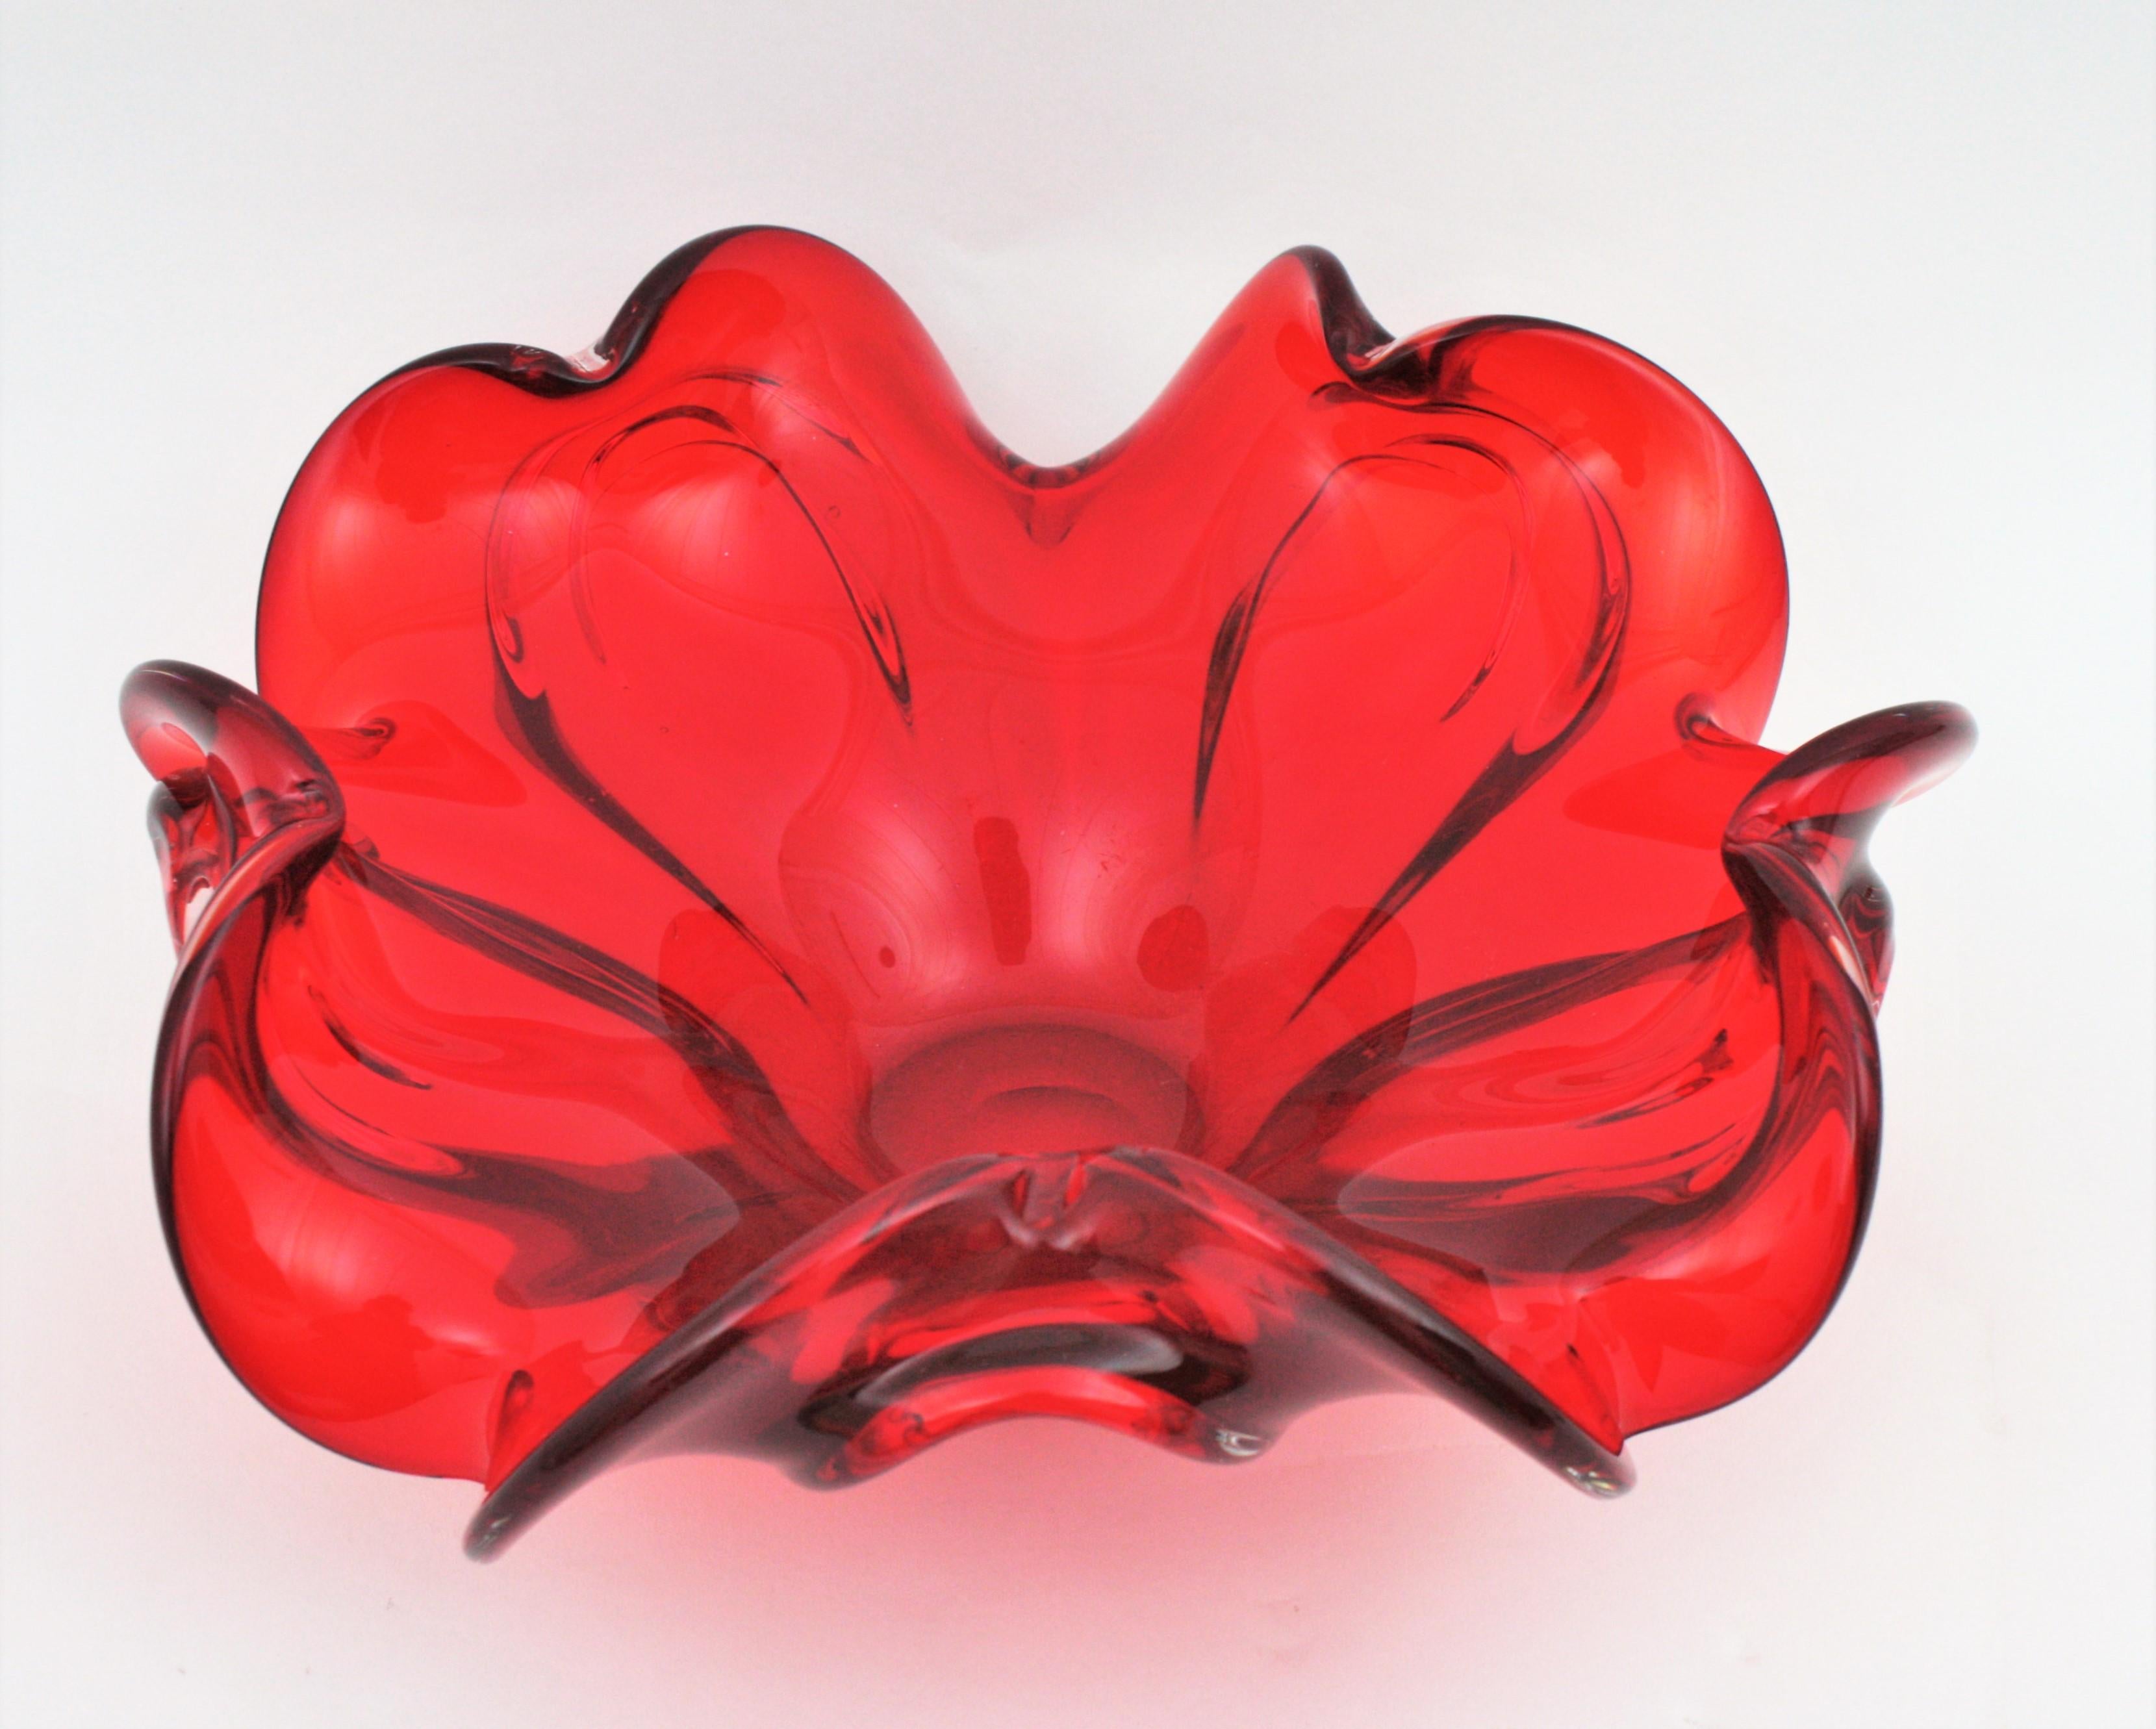 XXL Archimede Seguso Murano Ruby Red Sommerso Glass Flower Centerpiece Bowl 8